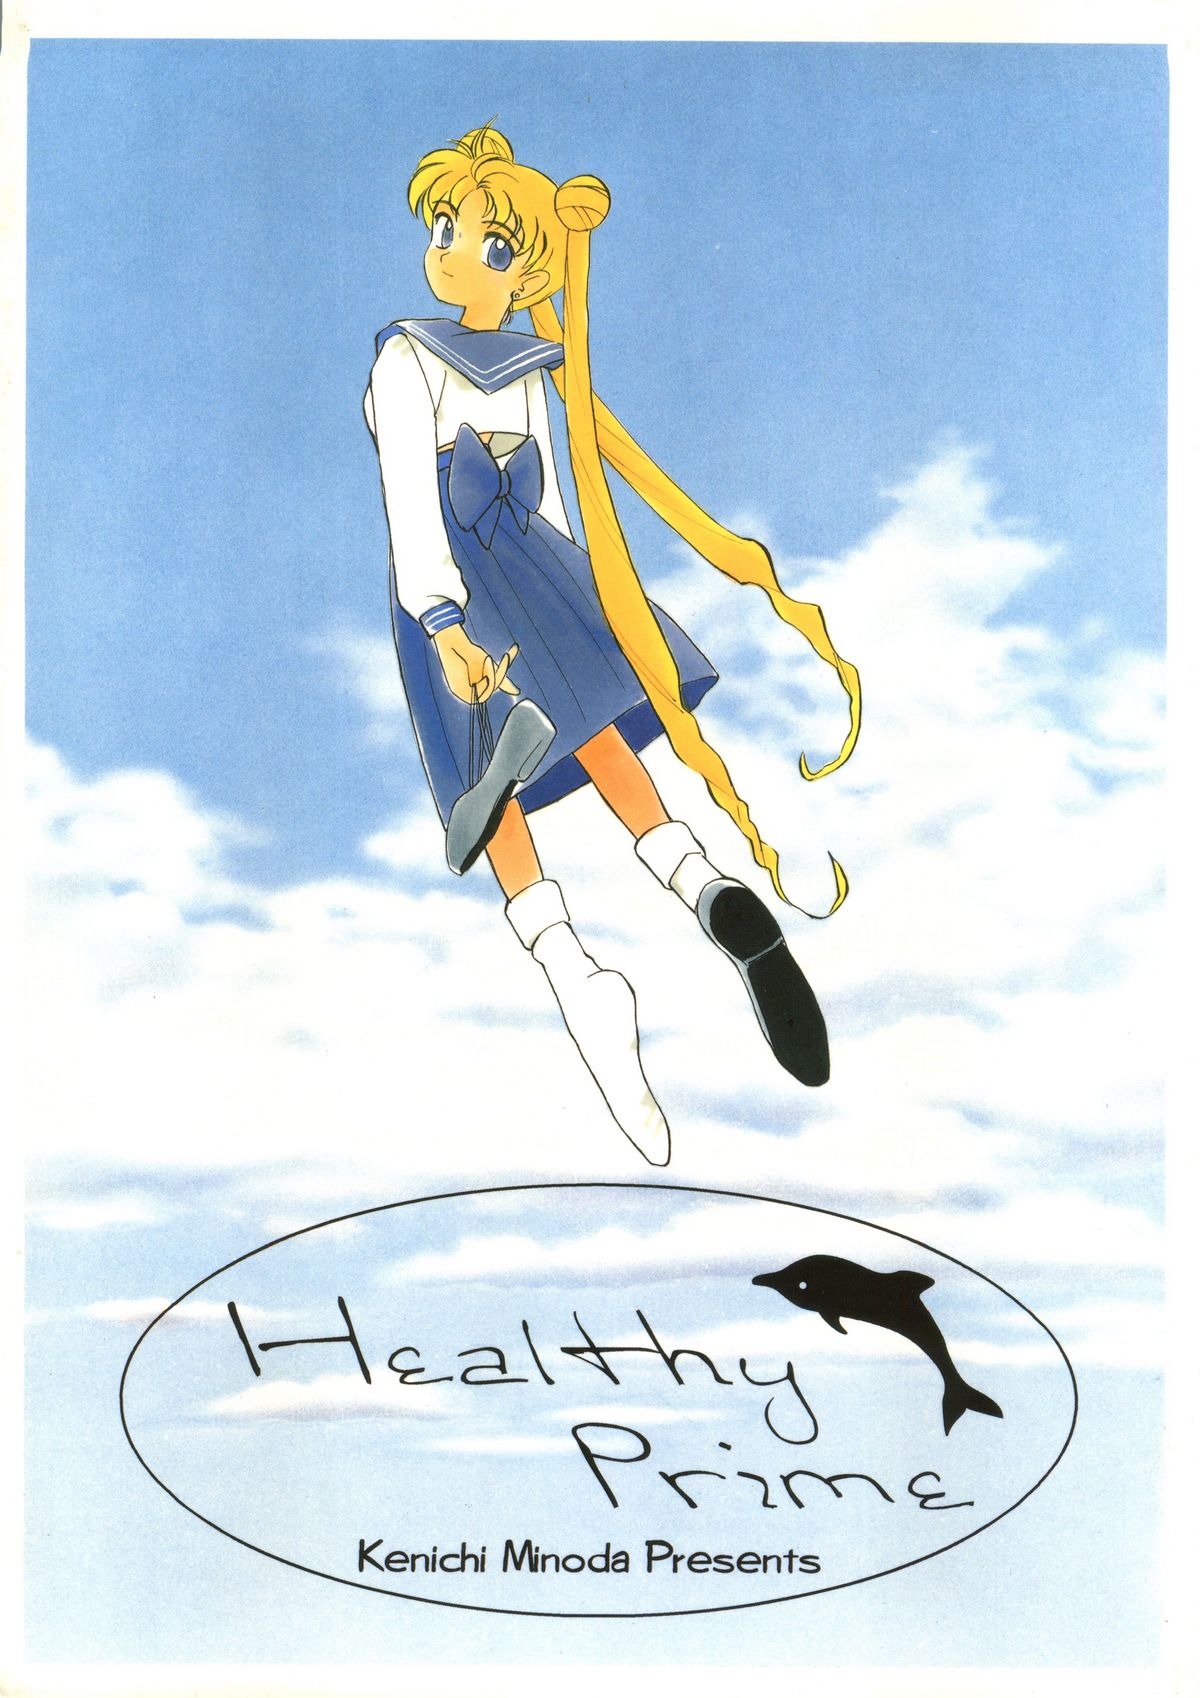 [Healthy Prime] Healty Prime The Beginning (Sailor Moon) (1993) 